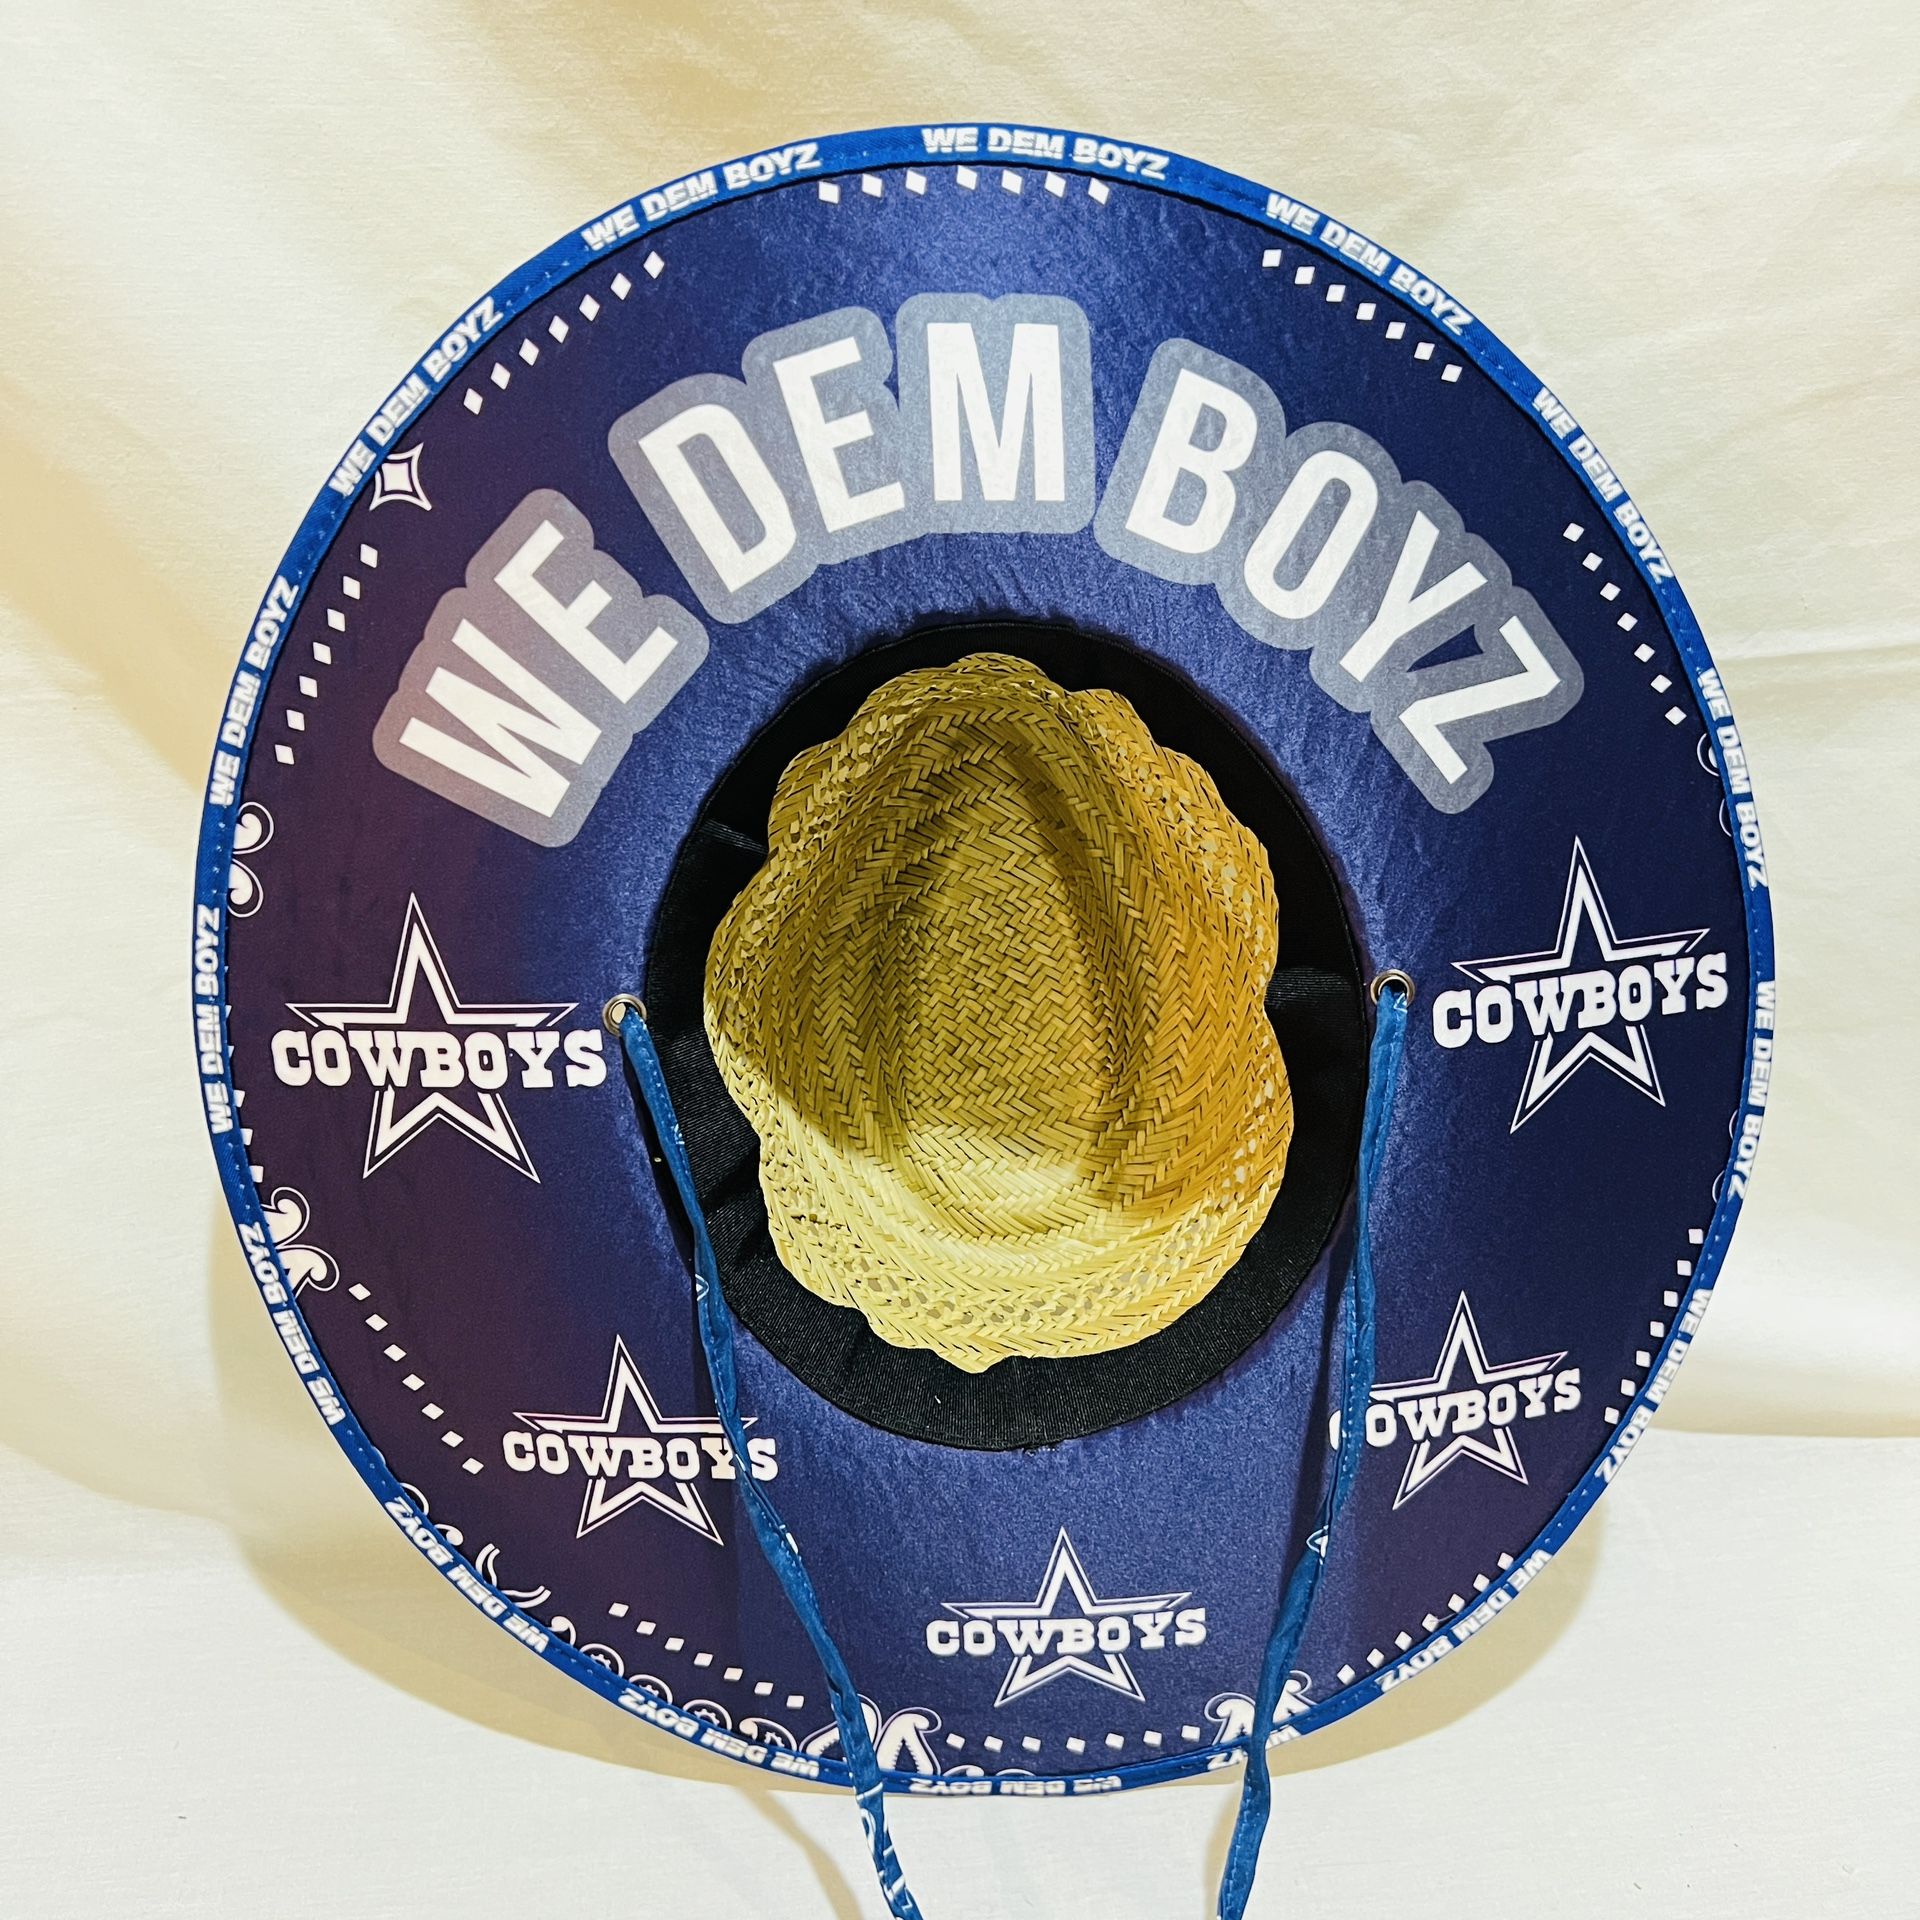 Dallas Cowboys We Dem Boyz Straw hat great gift 🎁 order now (I also have other Teams) 